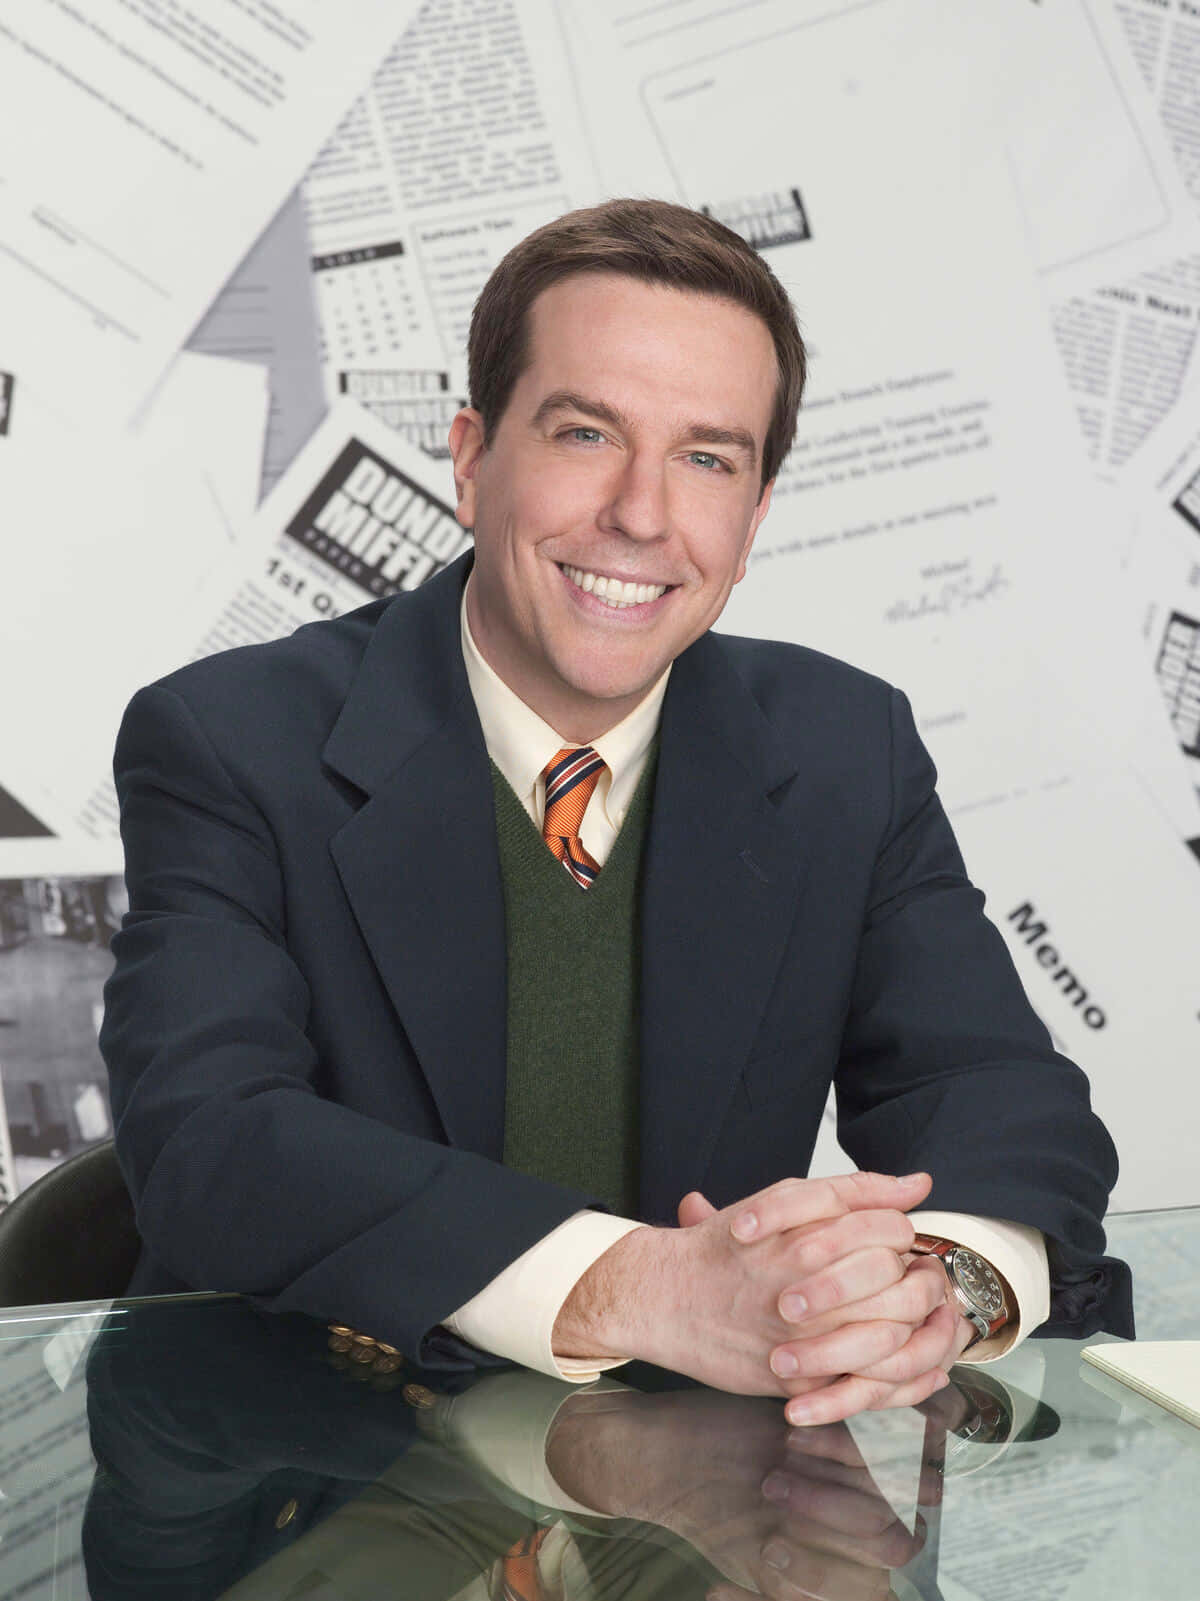 Comedic Actor Ed Helms In A Casual Interview Photo. Wallpaper